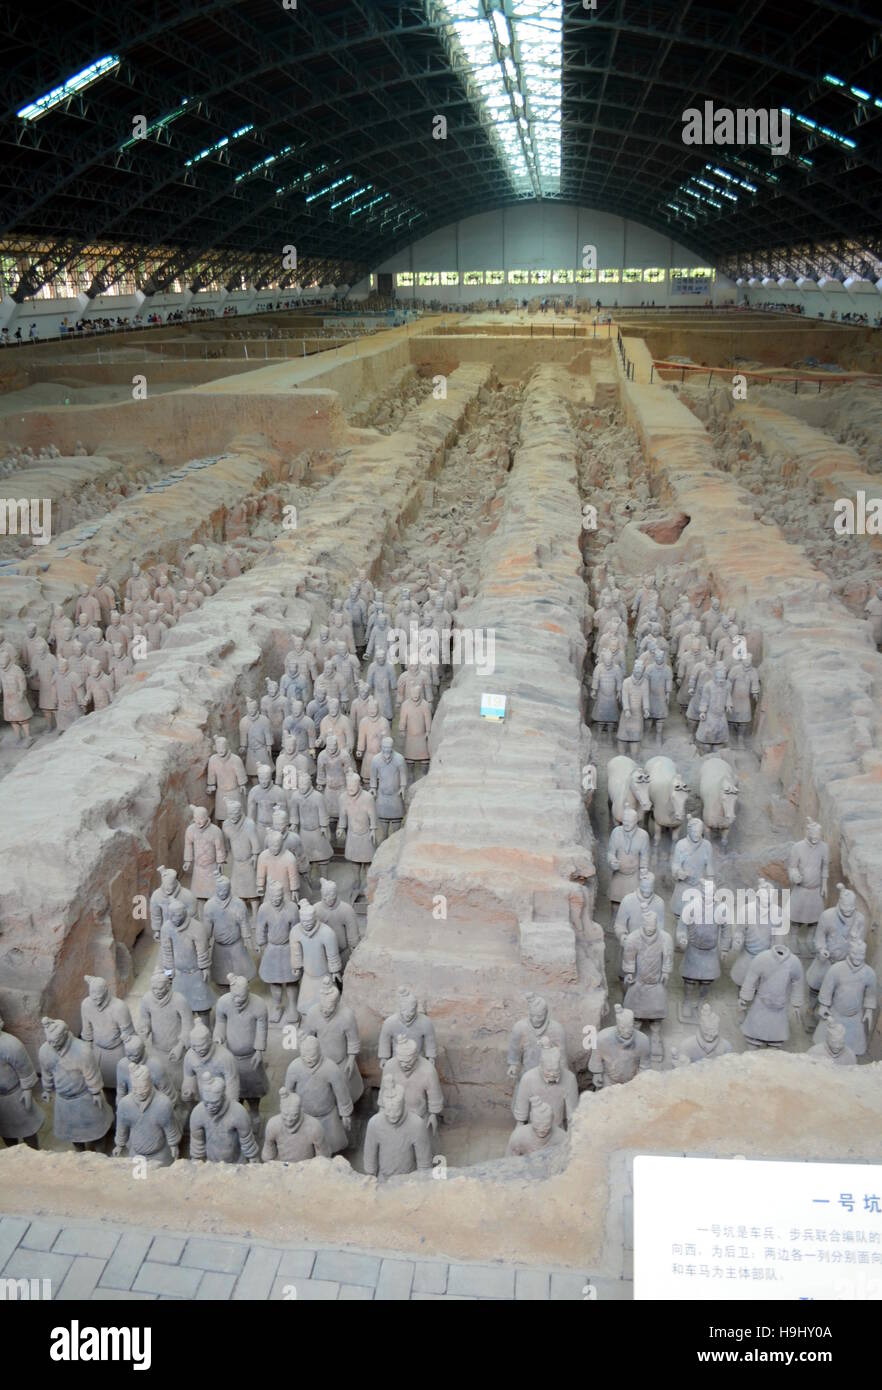 XIAN CHINA MAY 11 2016: exhibition of the famous Chinese Terracotta Army (Terracotta Warriors) on MAY 11, 2016 in Xian, of Shaan Stock Photo